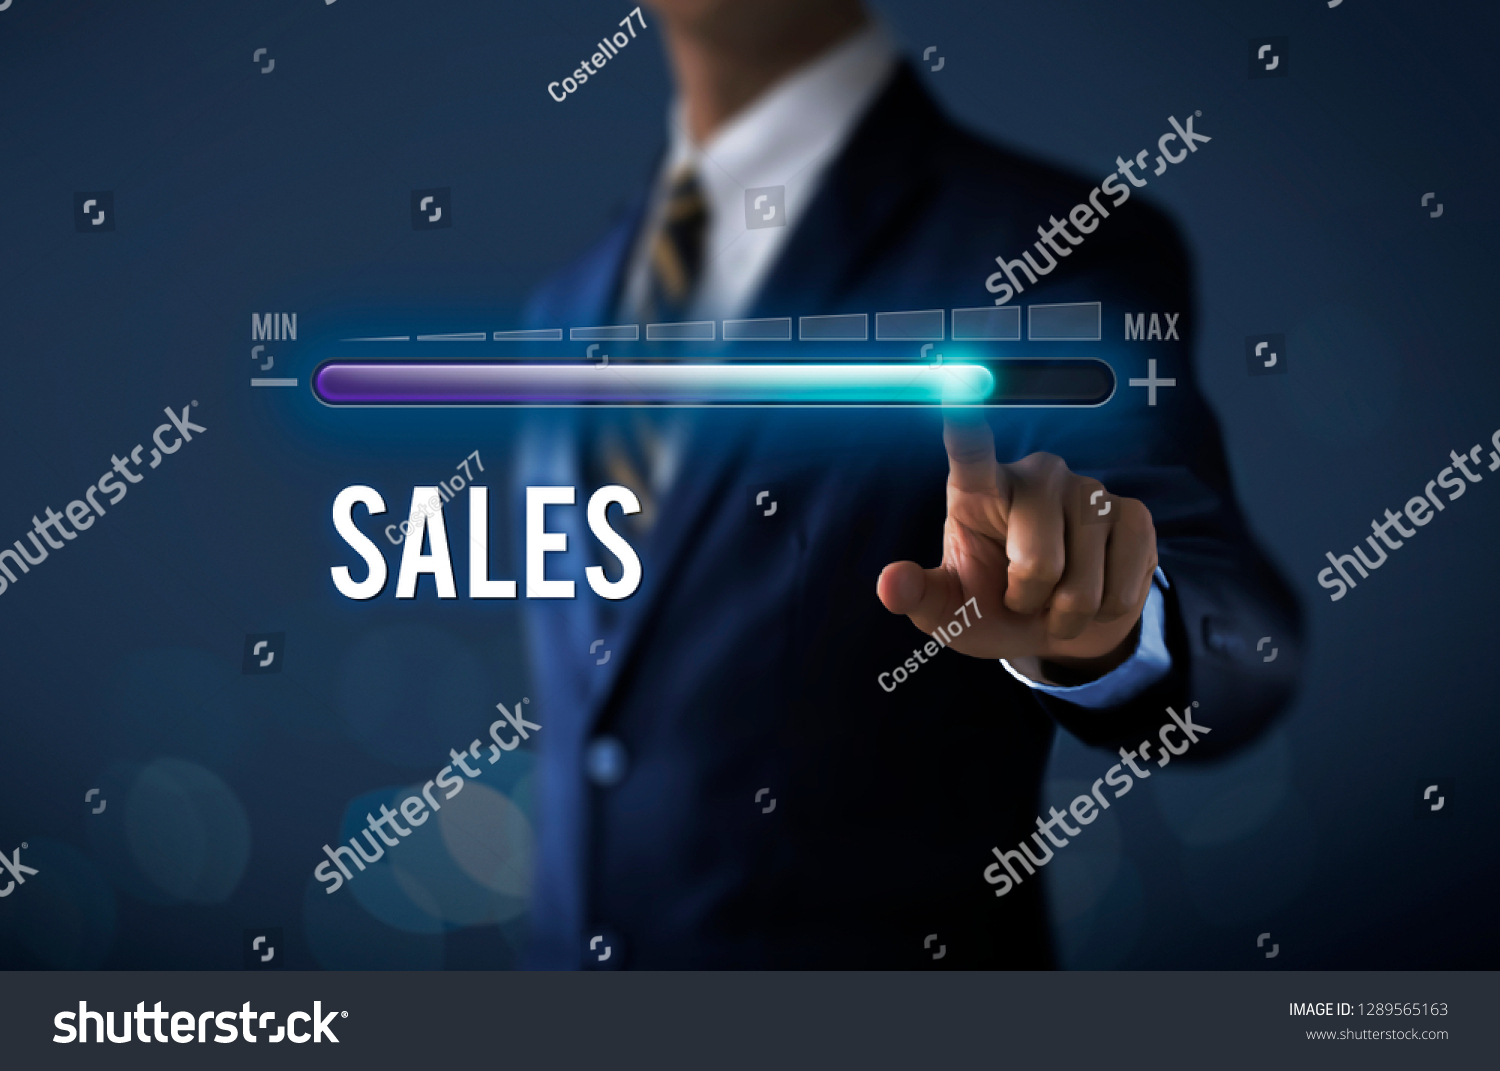 Sales growth, increase sales or business growth concept. Businessman is pulling up progress bar with the word SALES on dark tone background. #1289565163